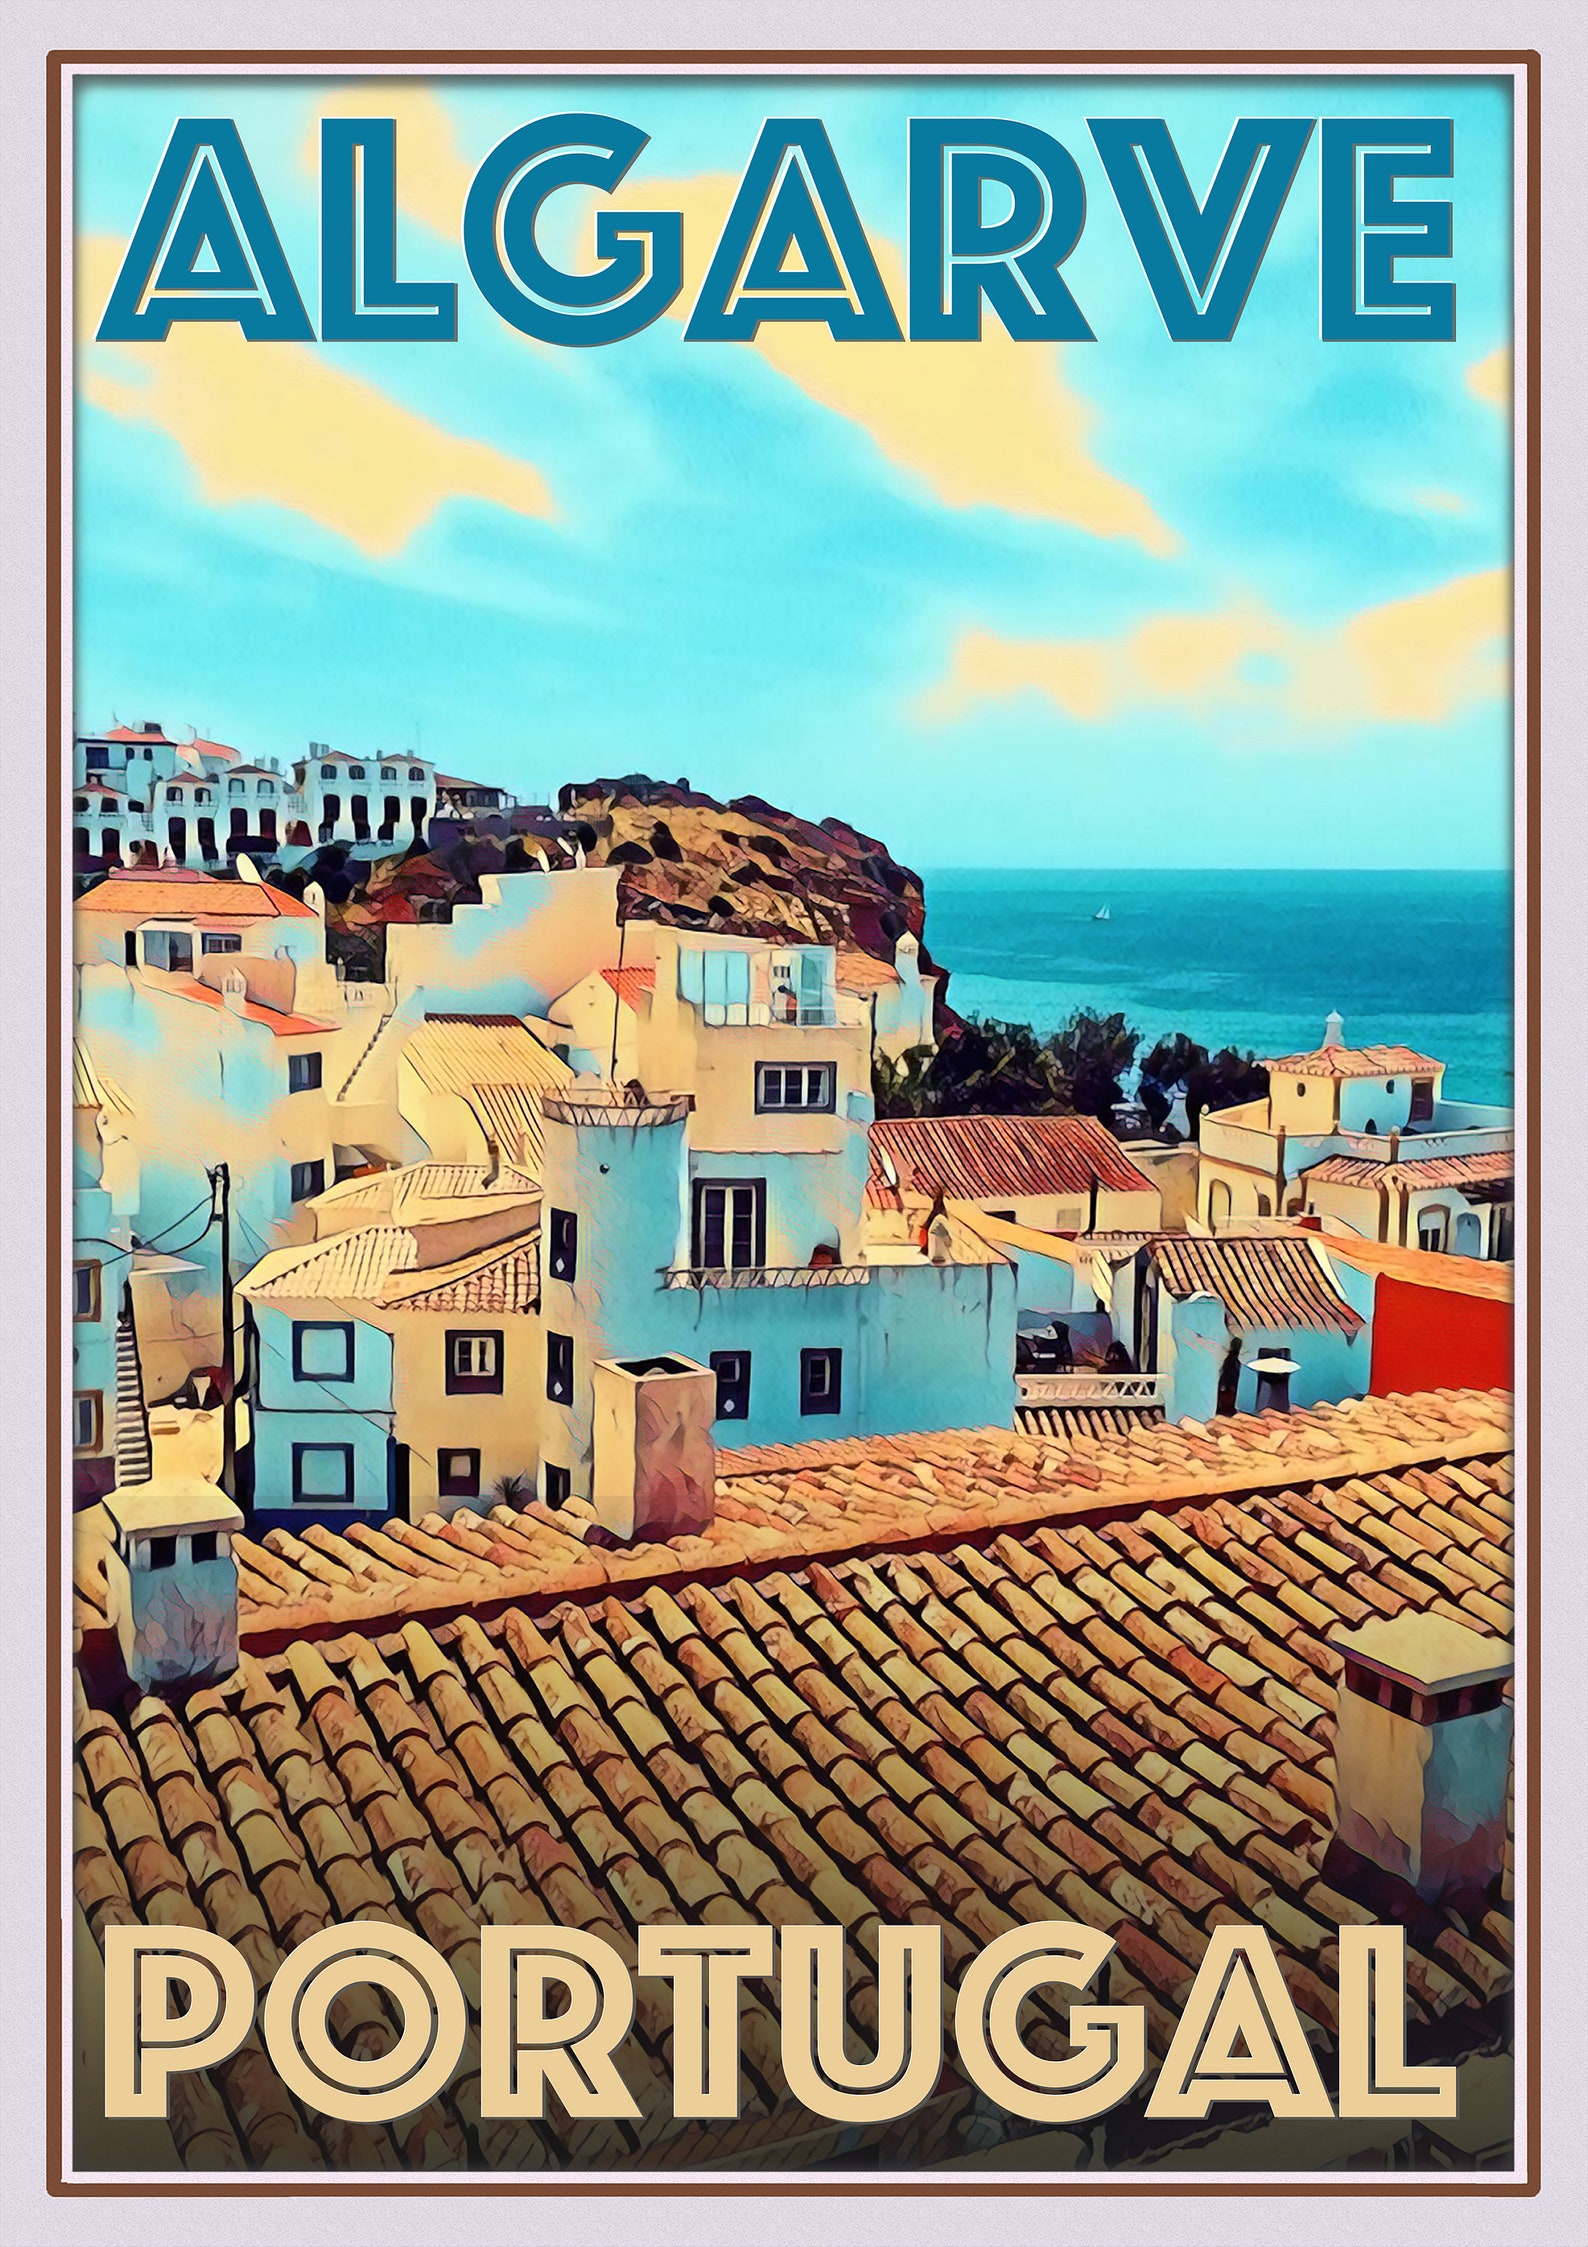 Retro Vintage Style Travel Poster or Canvas Picture Algarve | Etsy